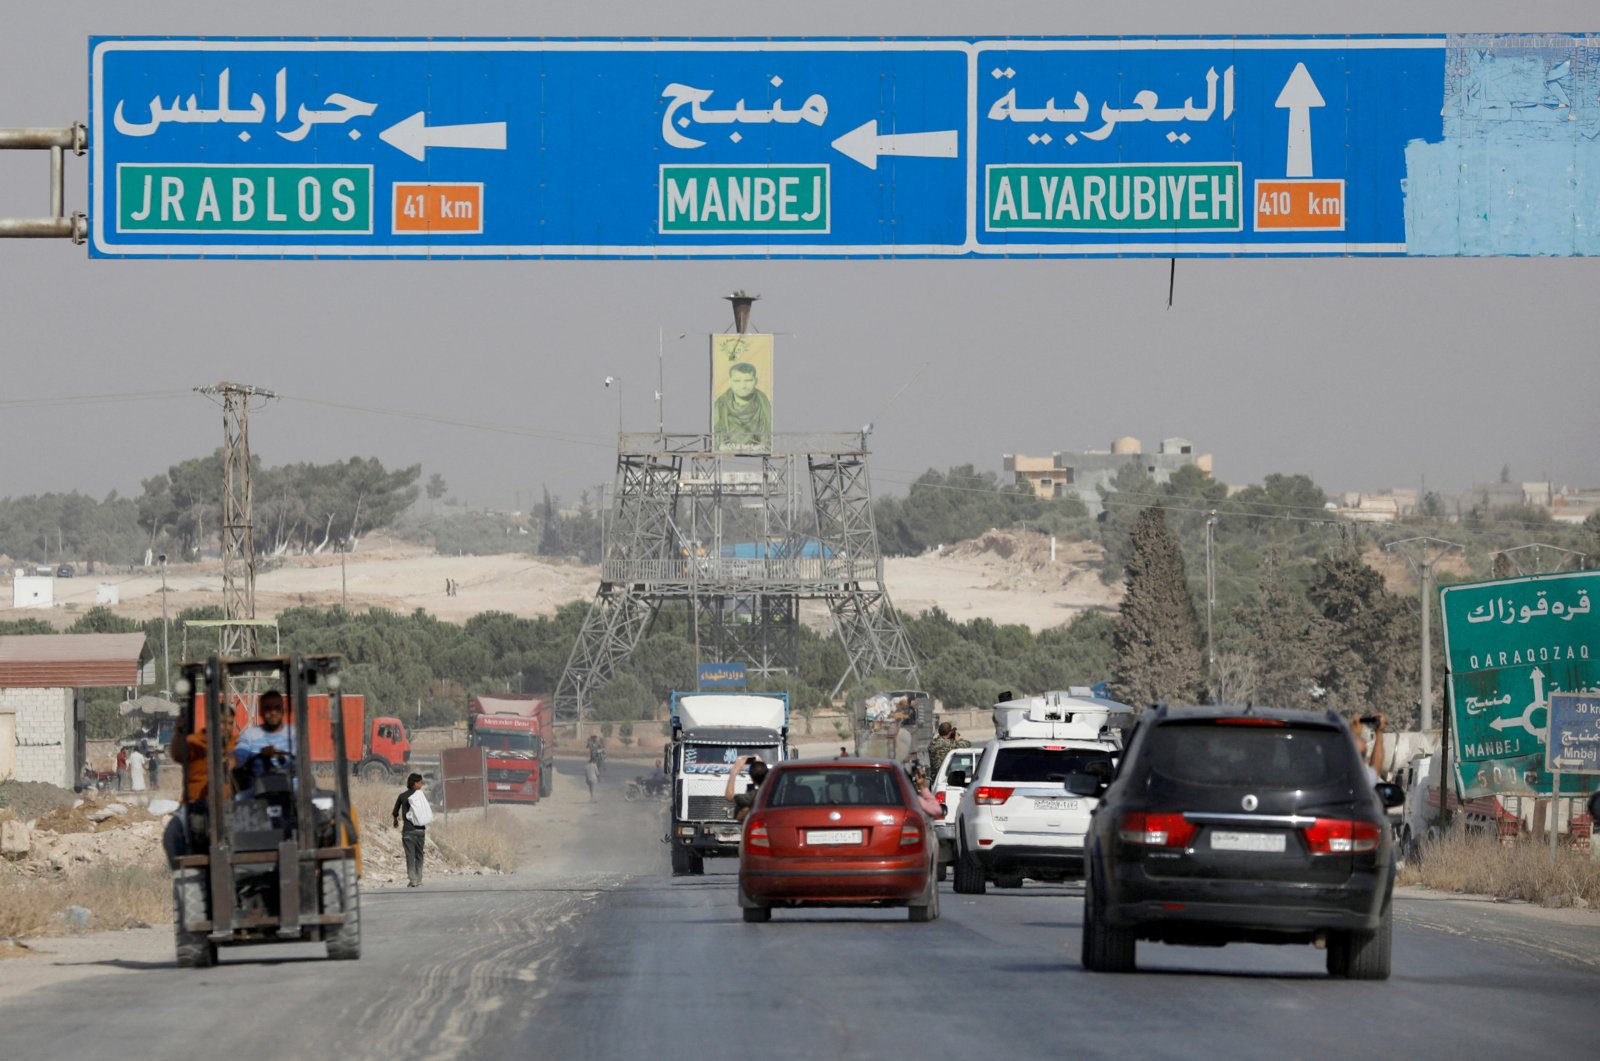 Cars pass under a road sign that shows the direction to Manbij city, at the entrance of Manbij, Syria October 15, 2019. REUTERS/Omar Sanadiki/File Photo